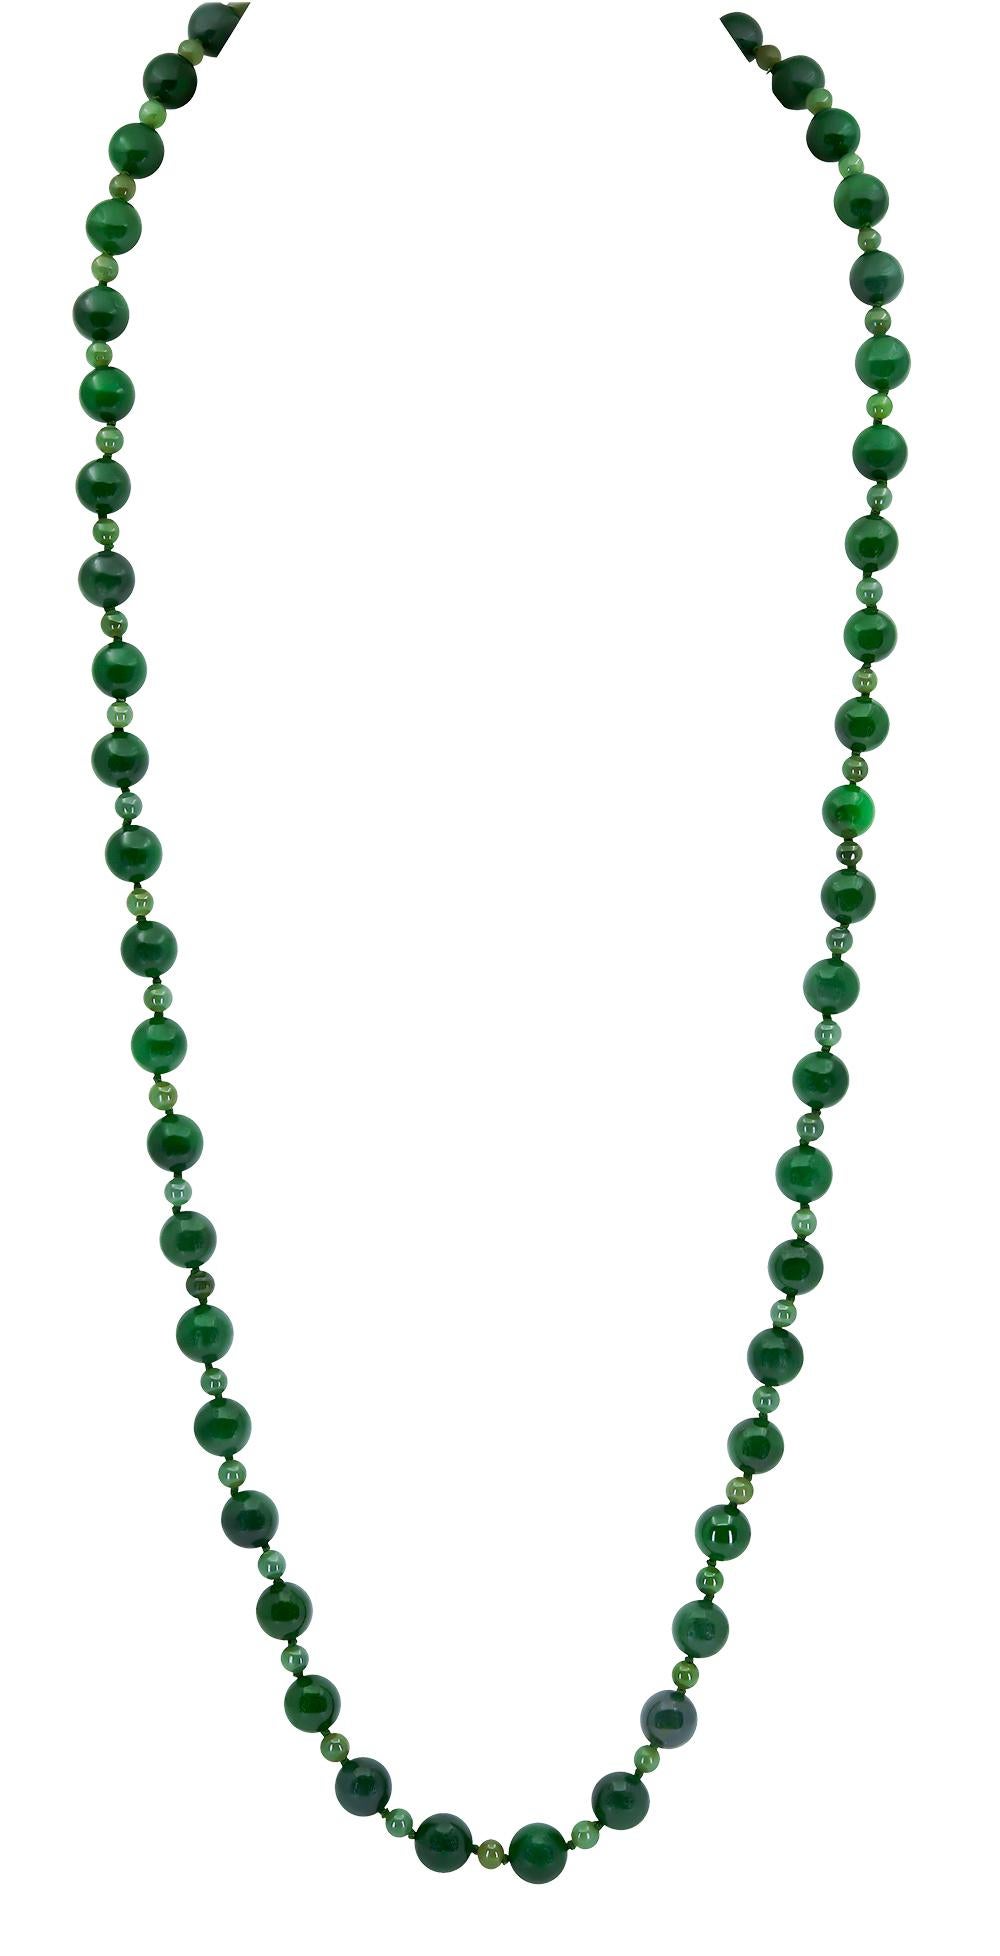 A 35 inch Jade Necklace with 10 mm round Green Jade Beads separated by 5mm lighter Green Jade beads making a subtle and elegant look.    These Jade beads were purchased as part of an estate before being made into this classic necklace.           
